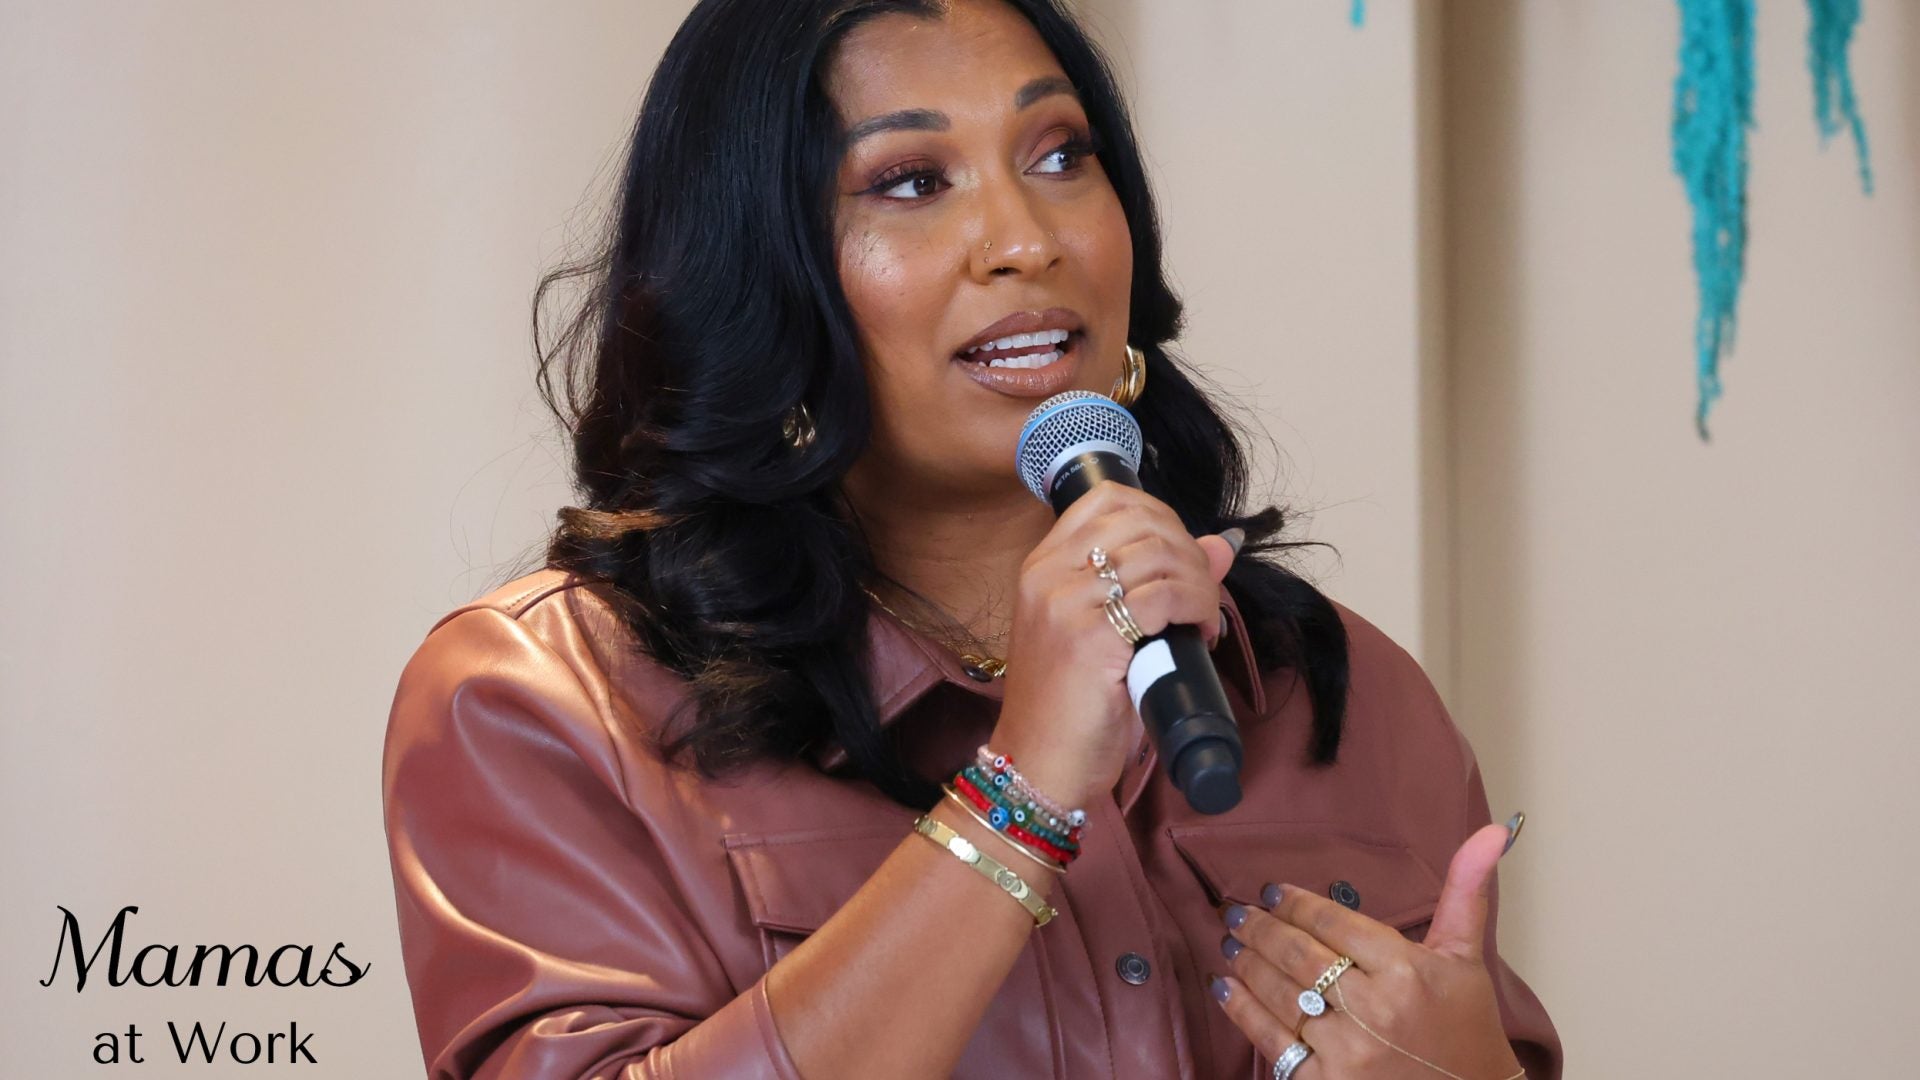 Mamas At Work: Melanie Fiona On Making Peace With Not Having The Birthing Experiences She Wanted